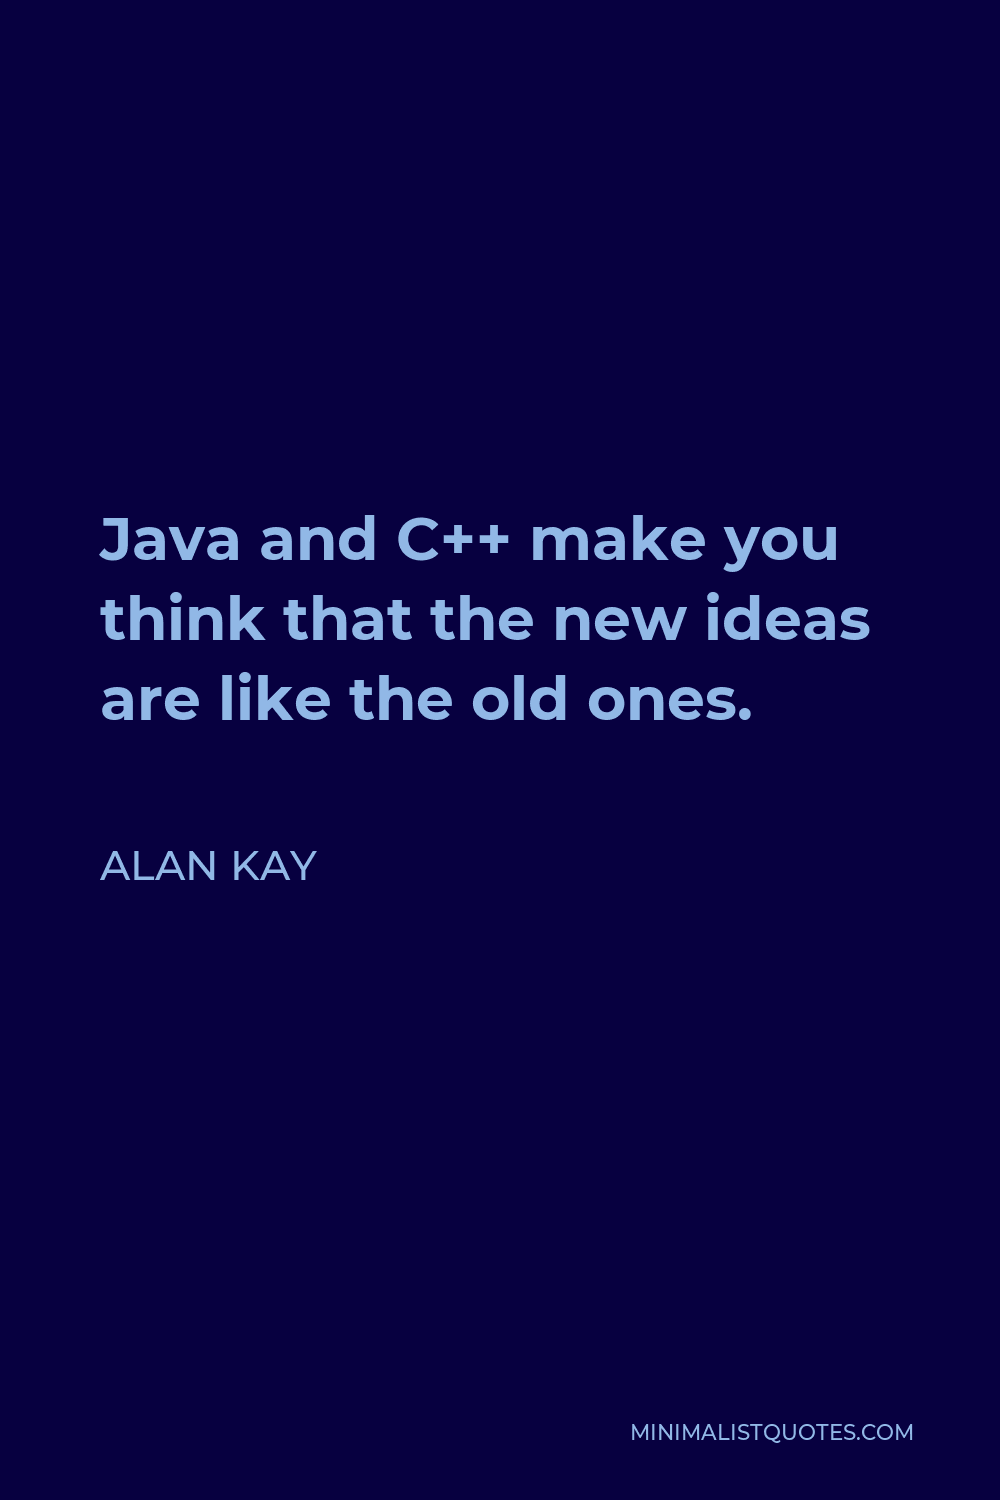 Alan Kay Quote - Java and C++ make you think that the new ideas are like the old ones.